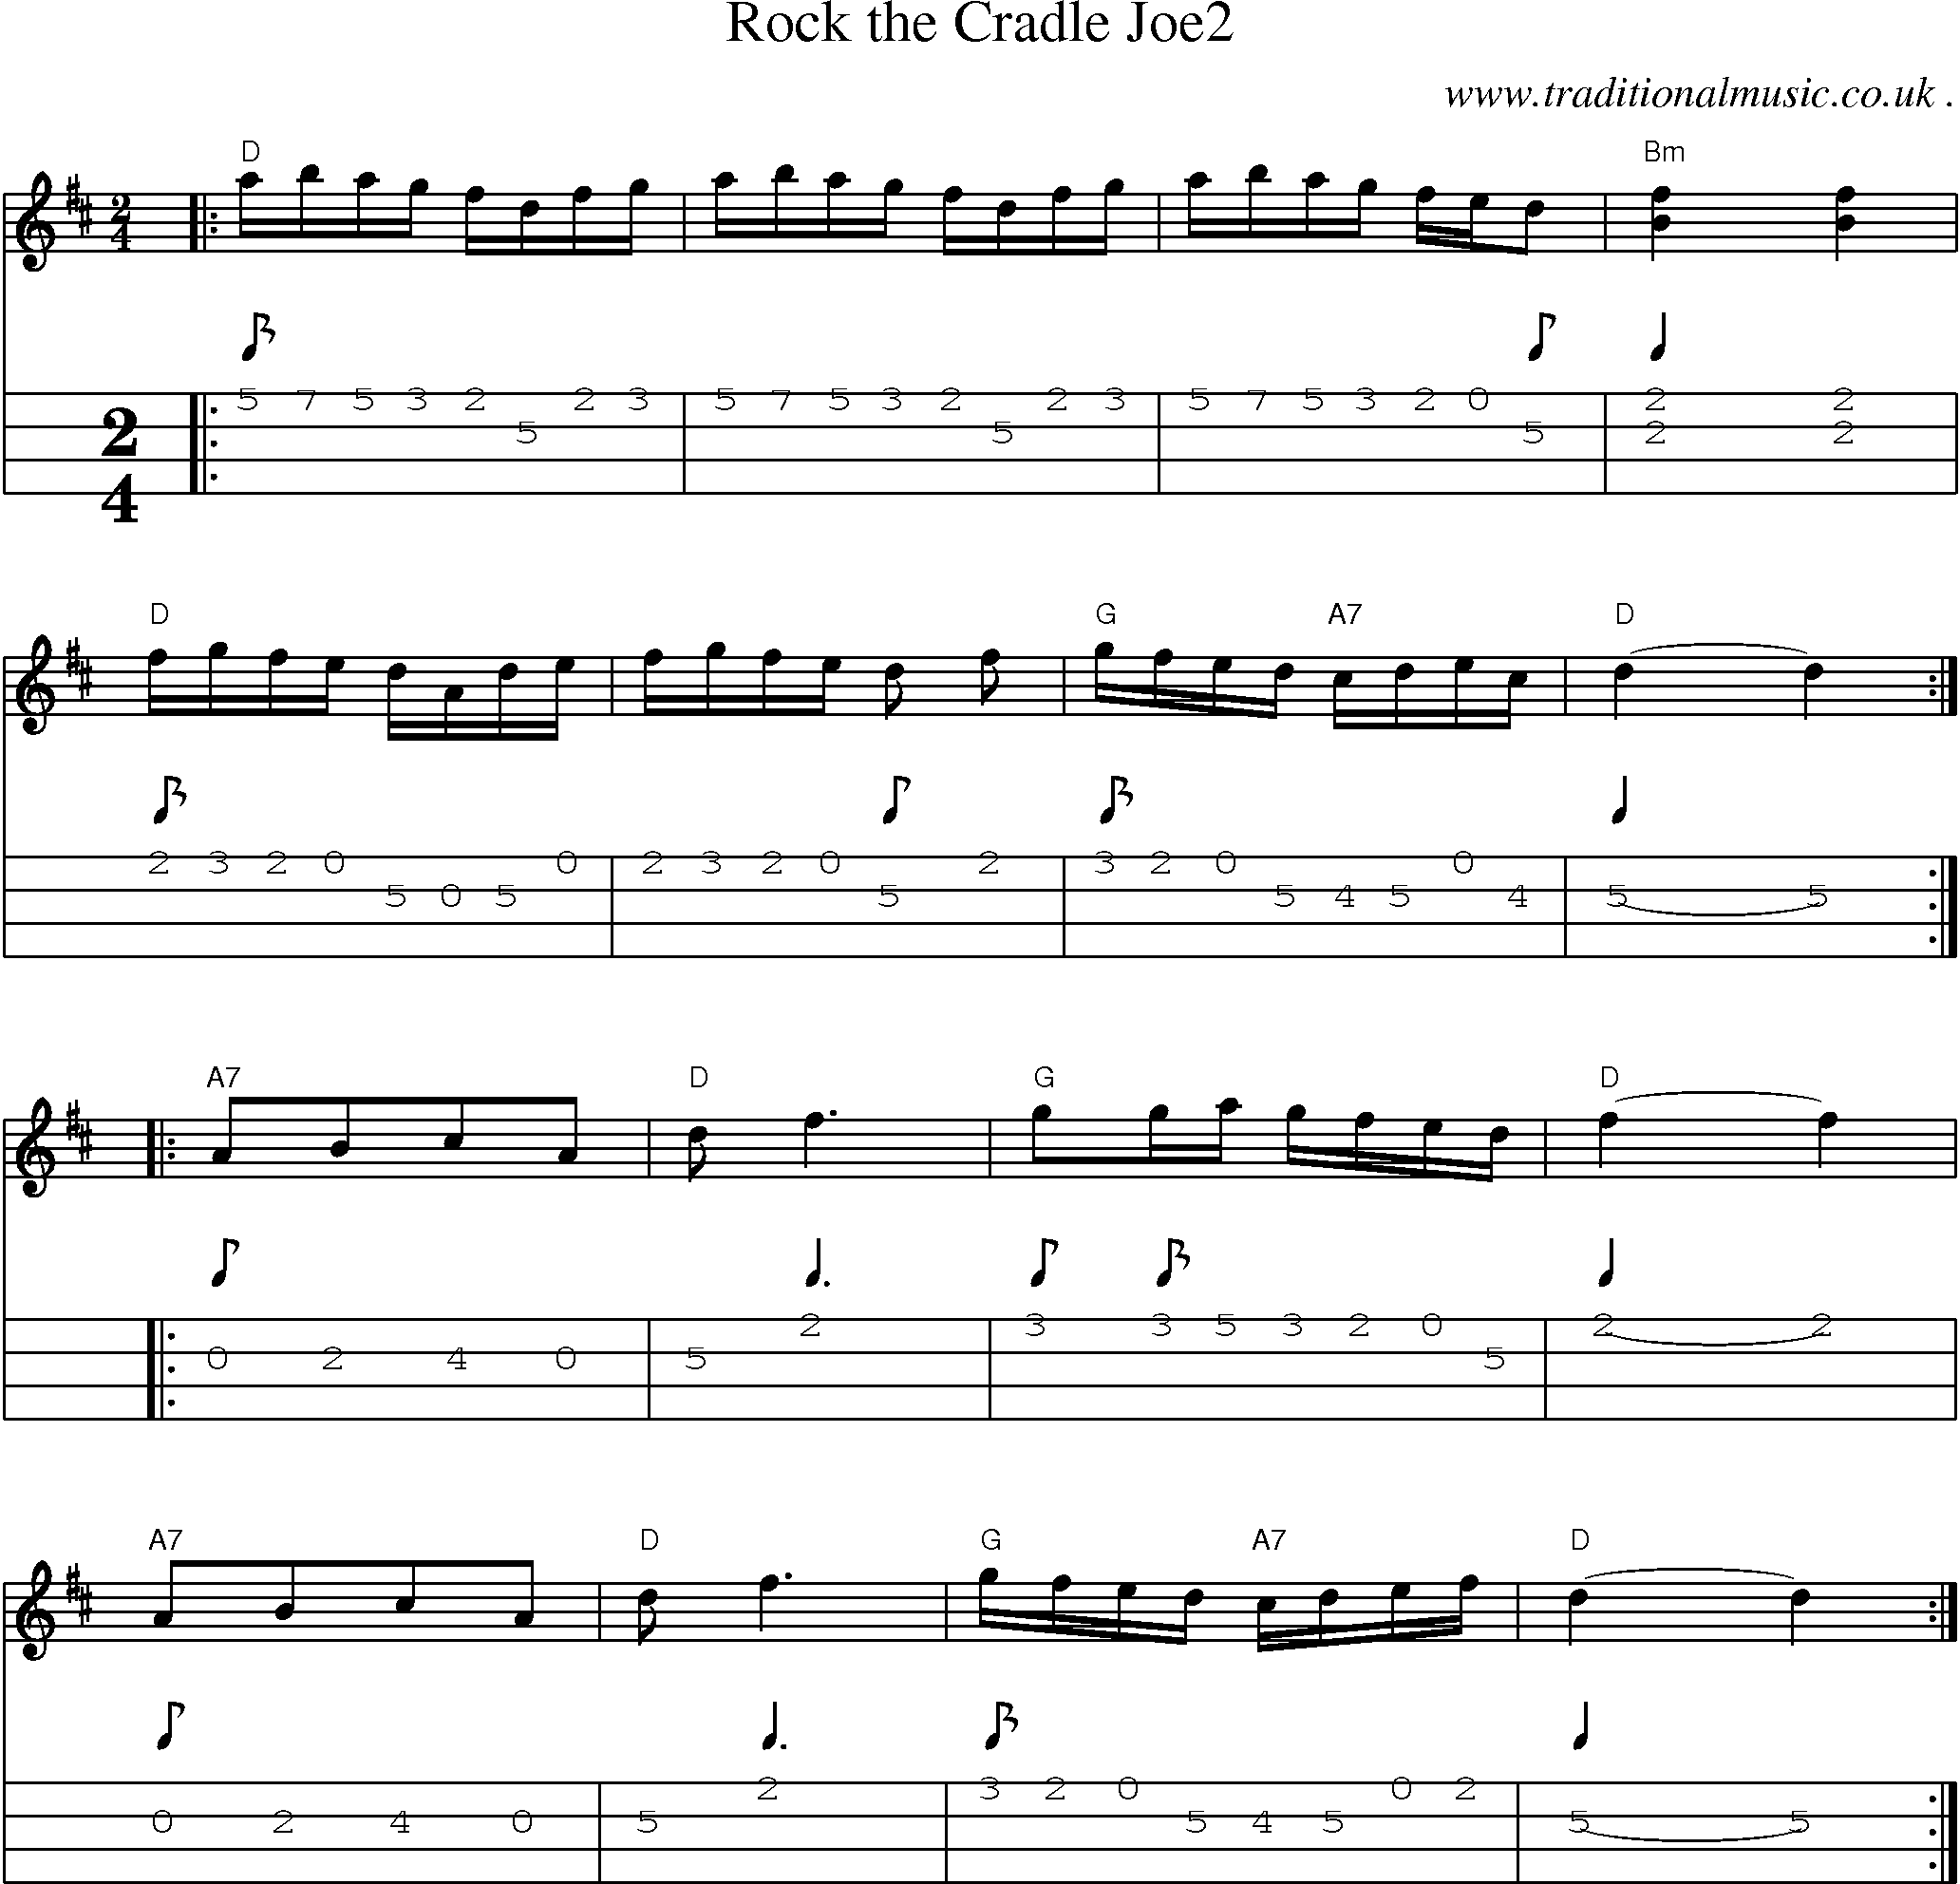 Music Score and Guitar Tabs for Rock The Cradle Joe2